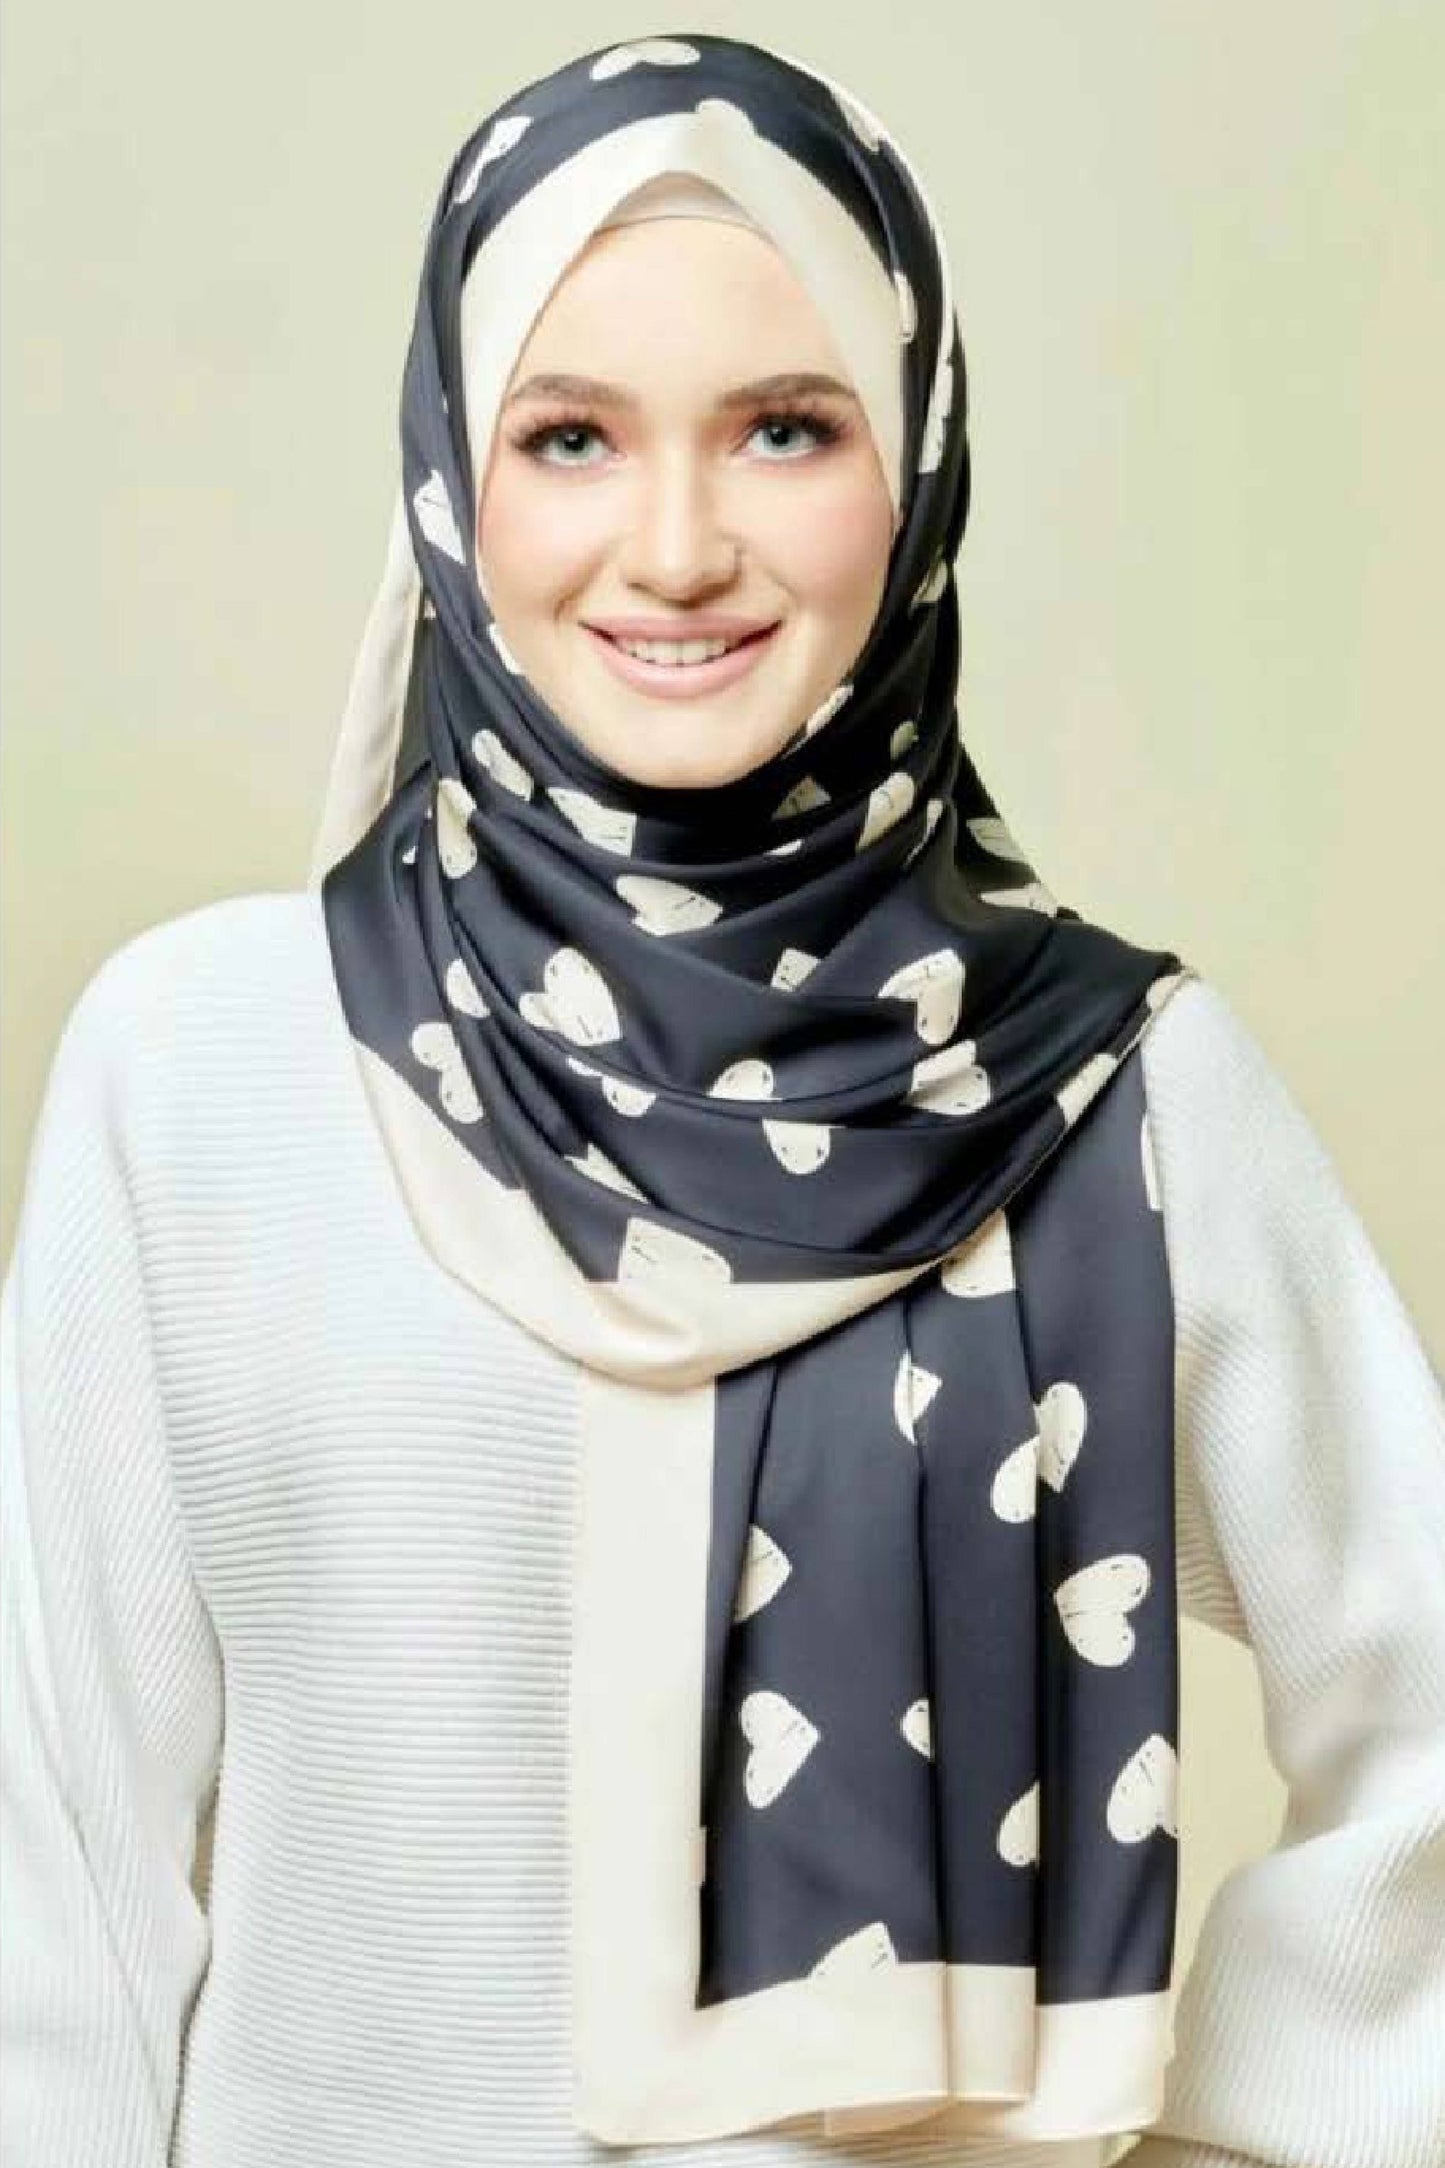 3 Piece Printed Heart Smoothy Silk Black Scarf Hijab For Women